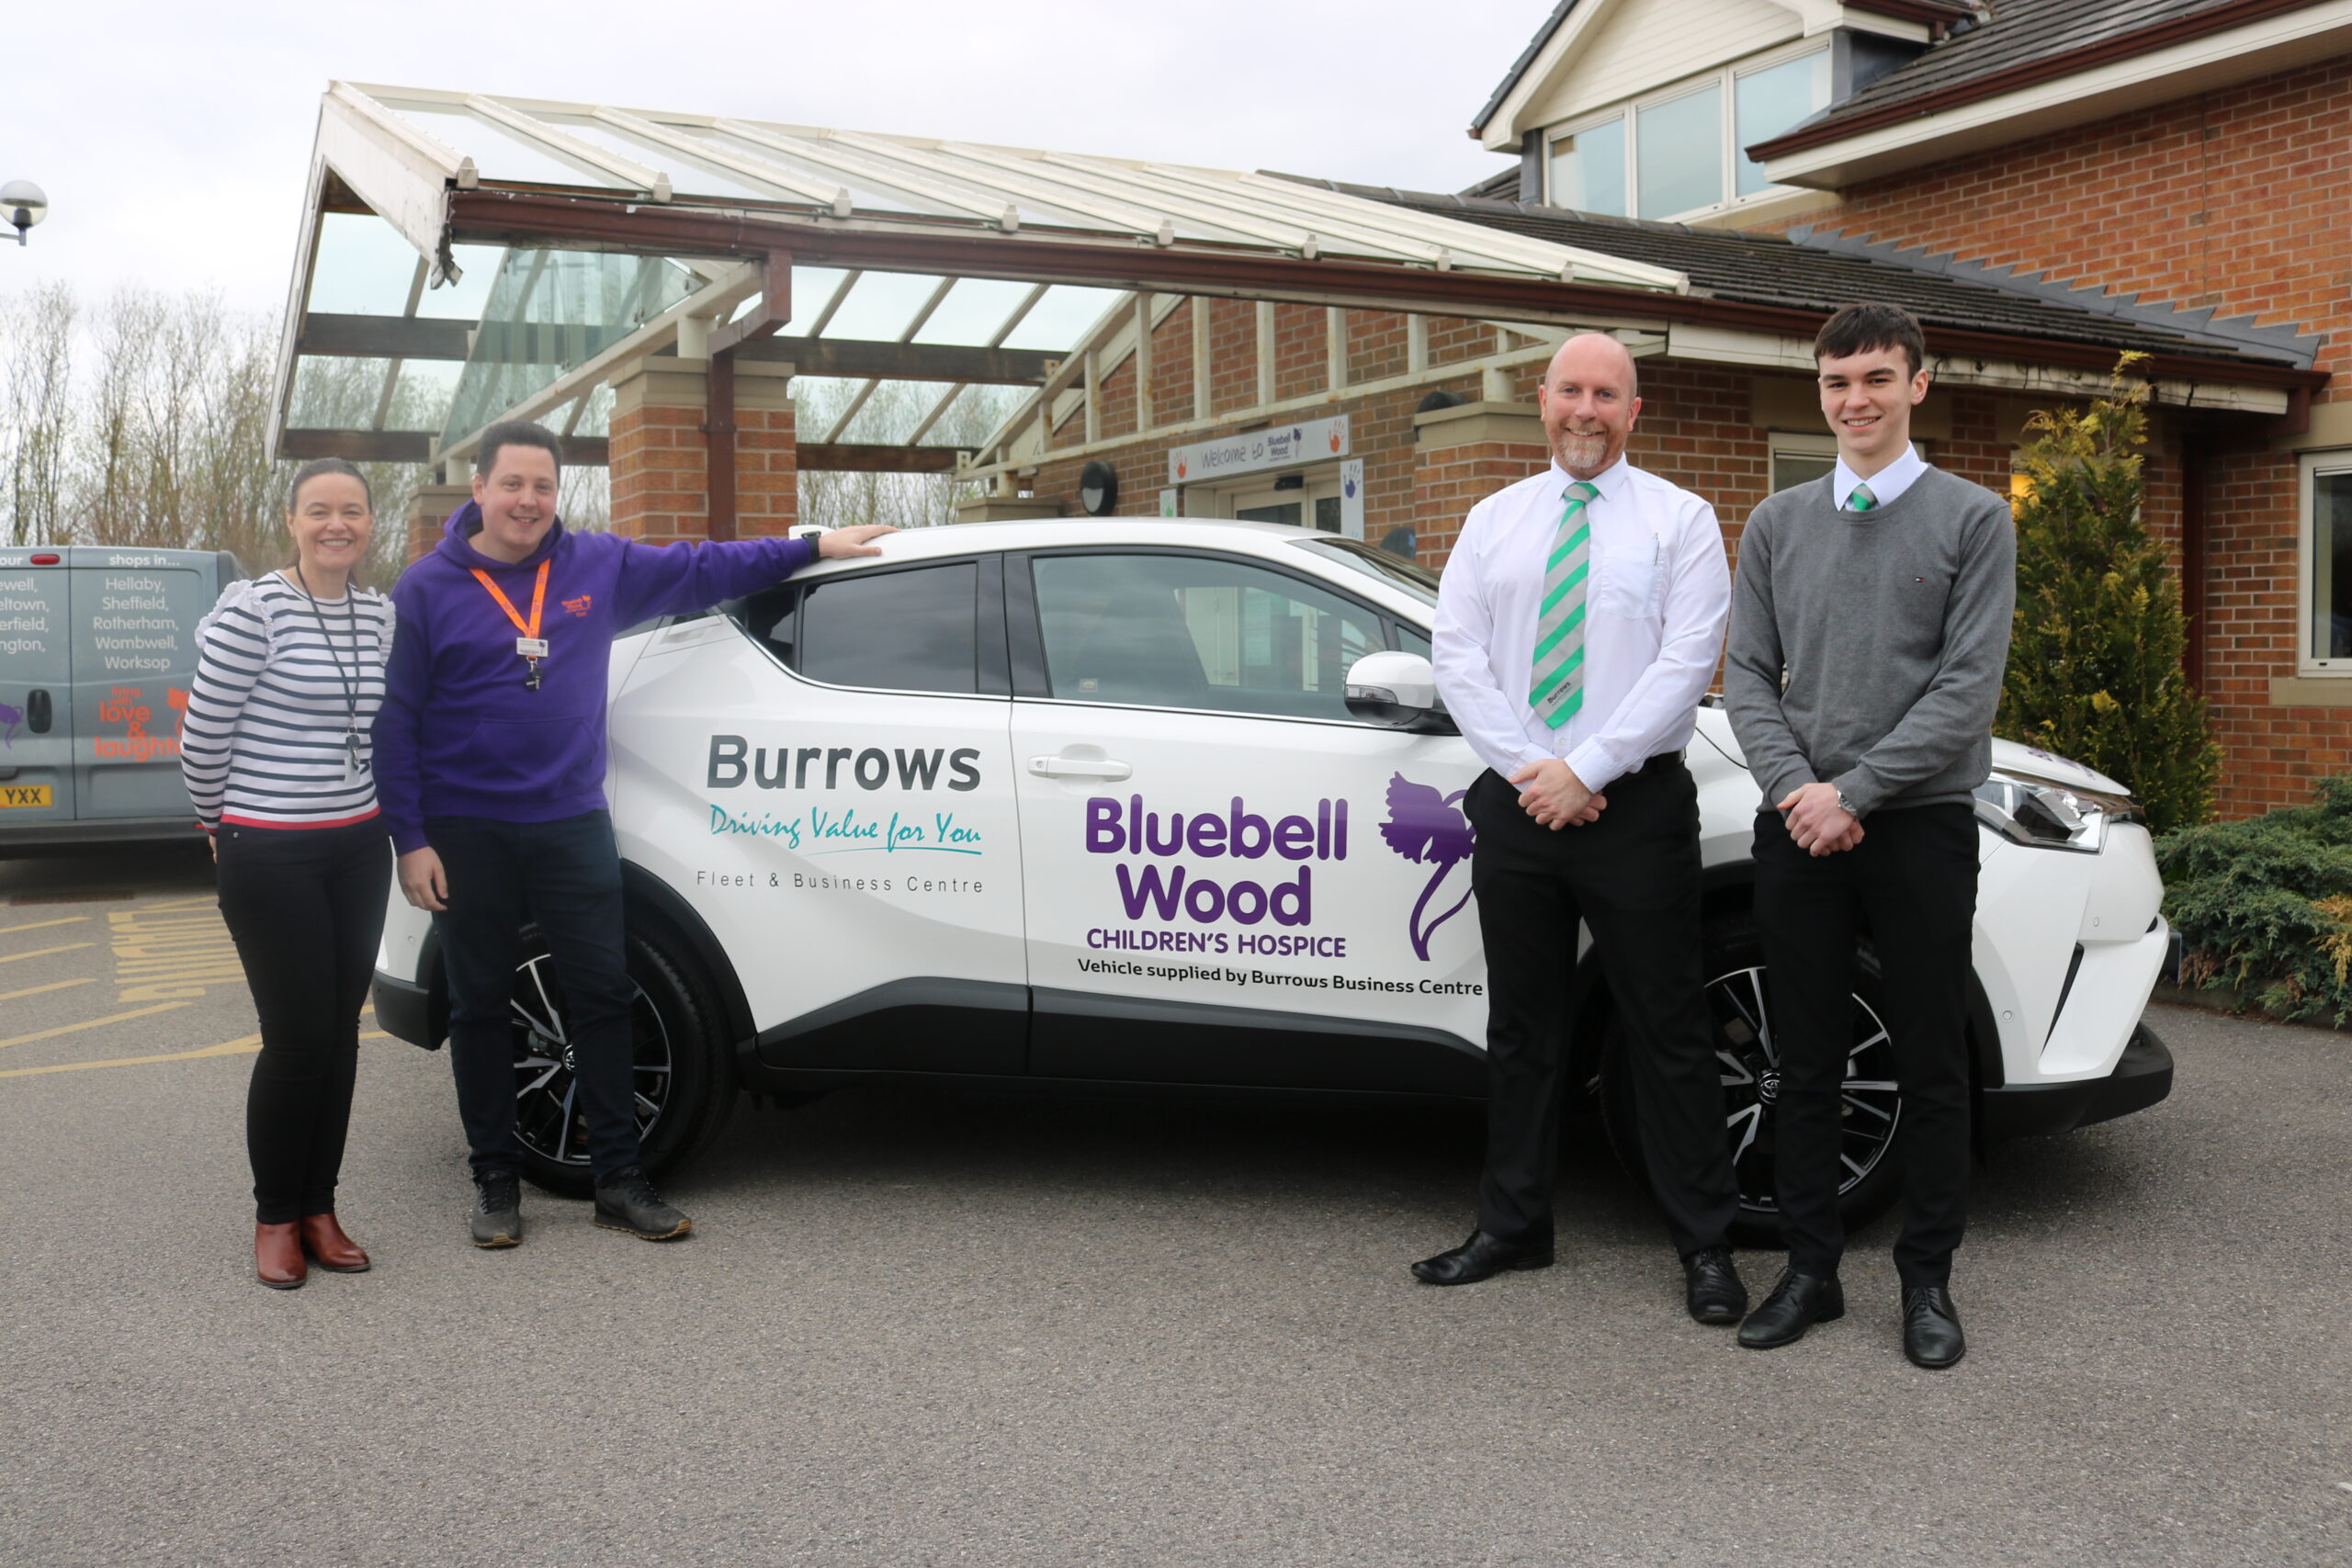 Bluebell Wood saves thousands thanks to Burrows Motor Company